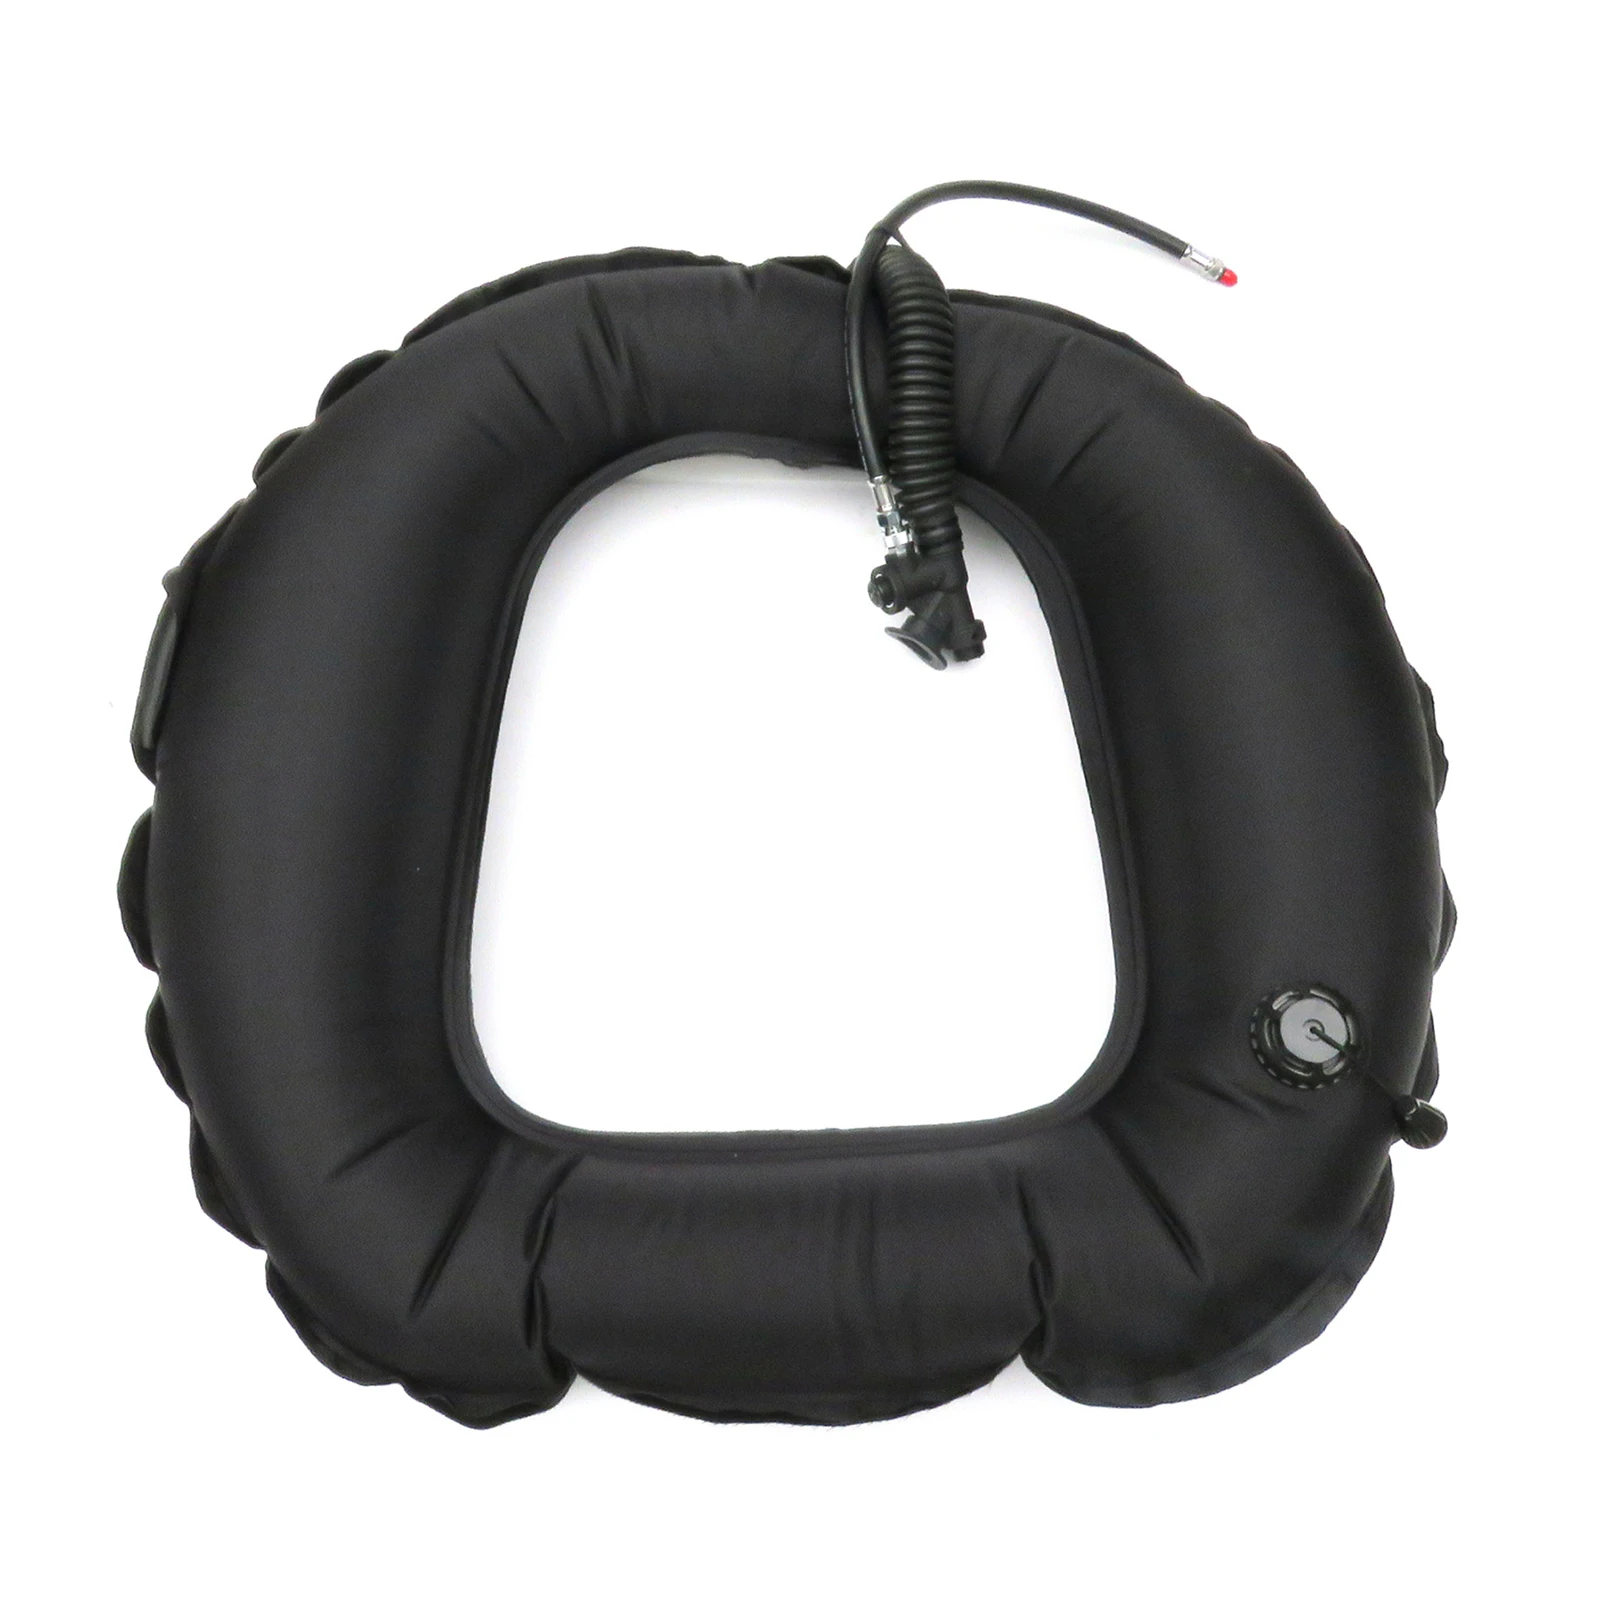 1 Piece 60 lbs Diving Donut Wing Freediving BCD Double Tank Buoyancy Diver Safe Gear Equipment